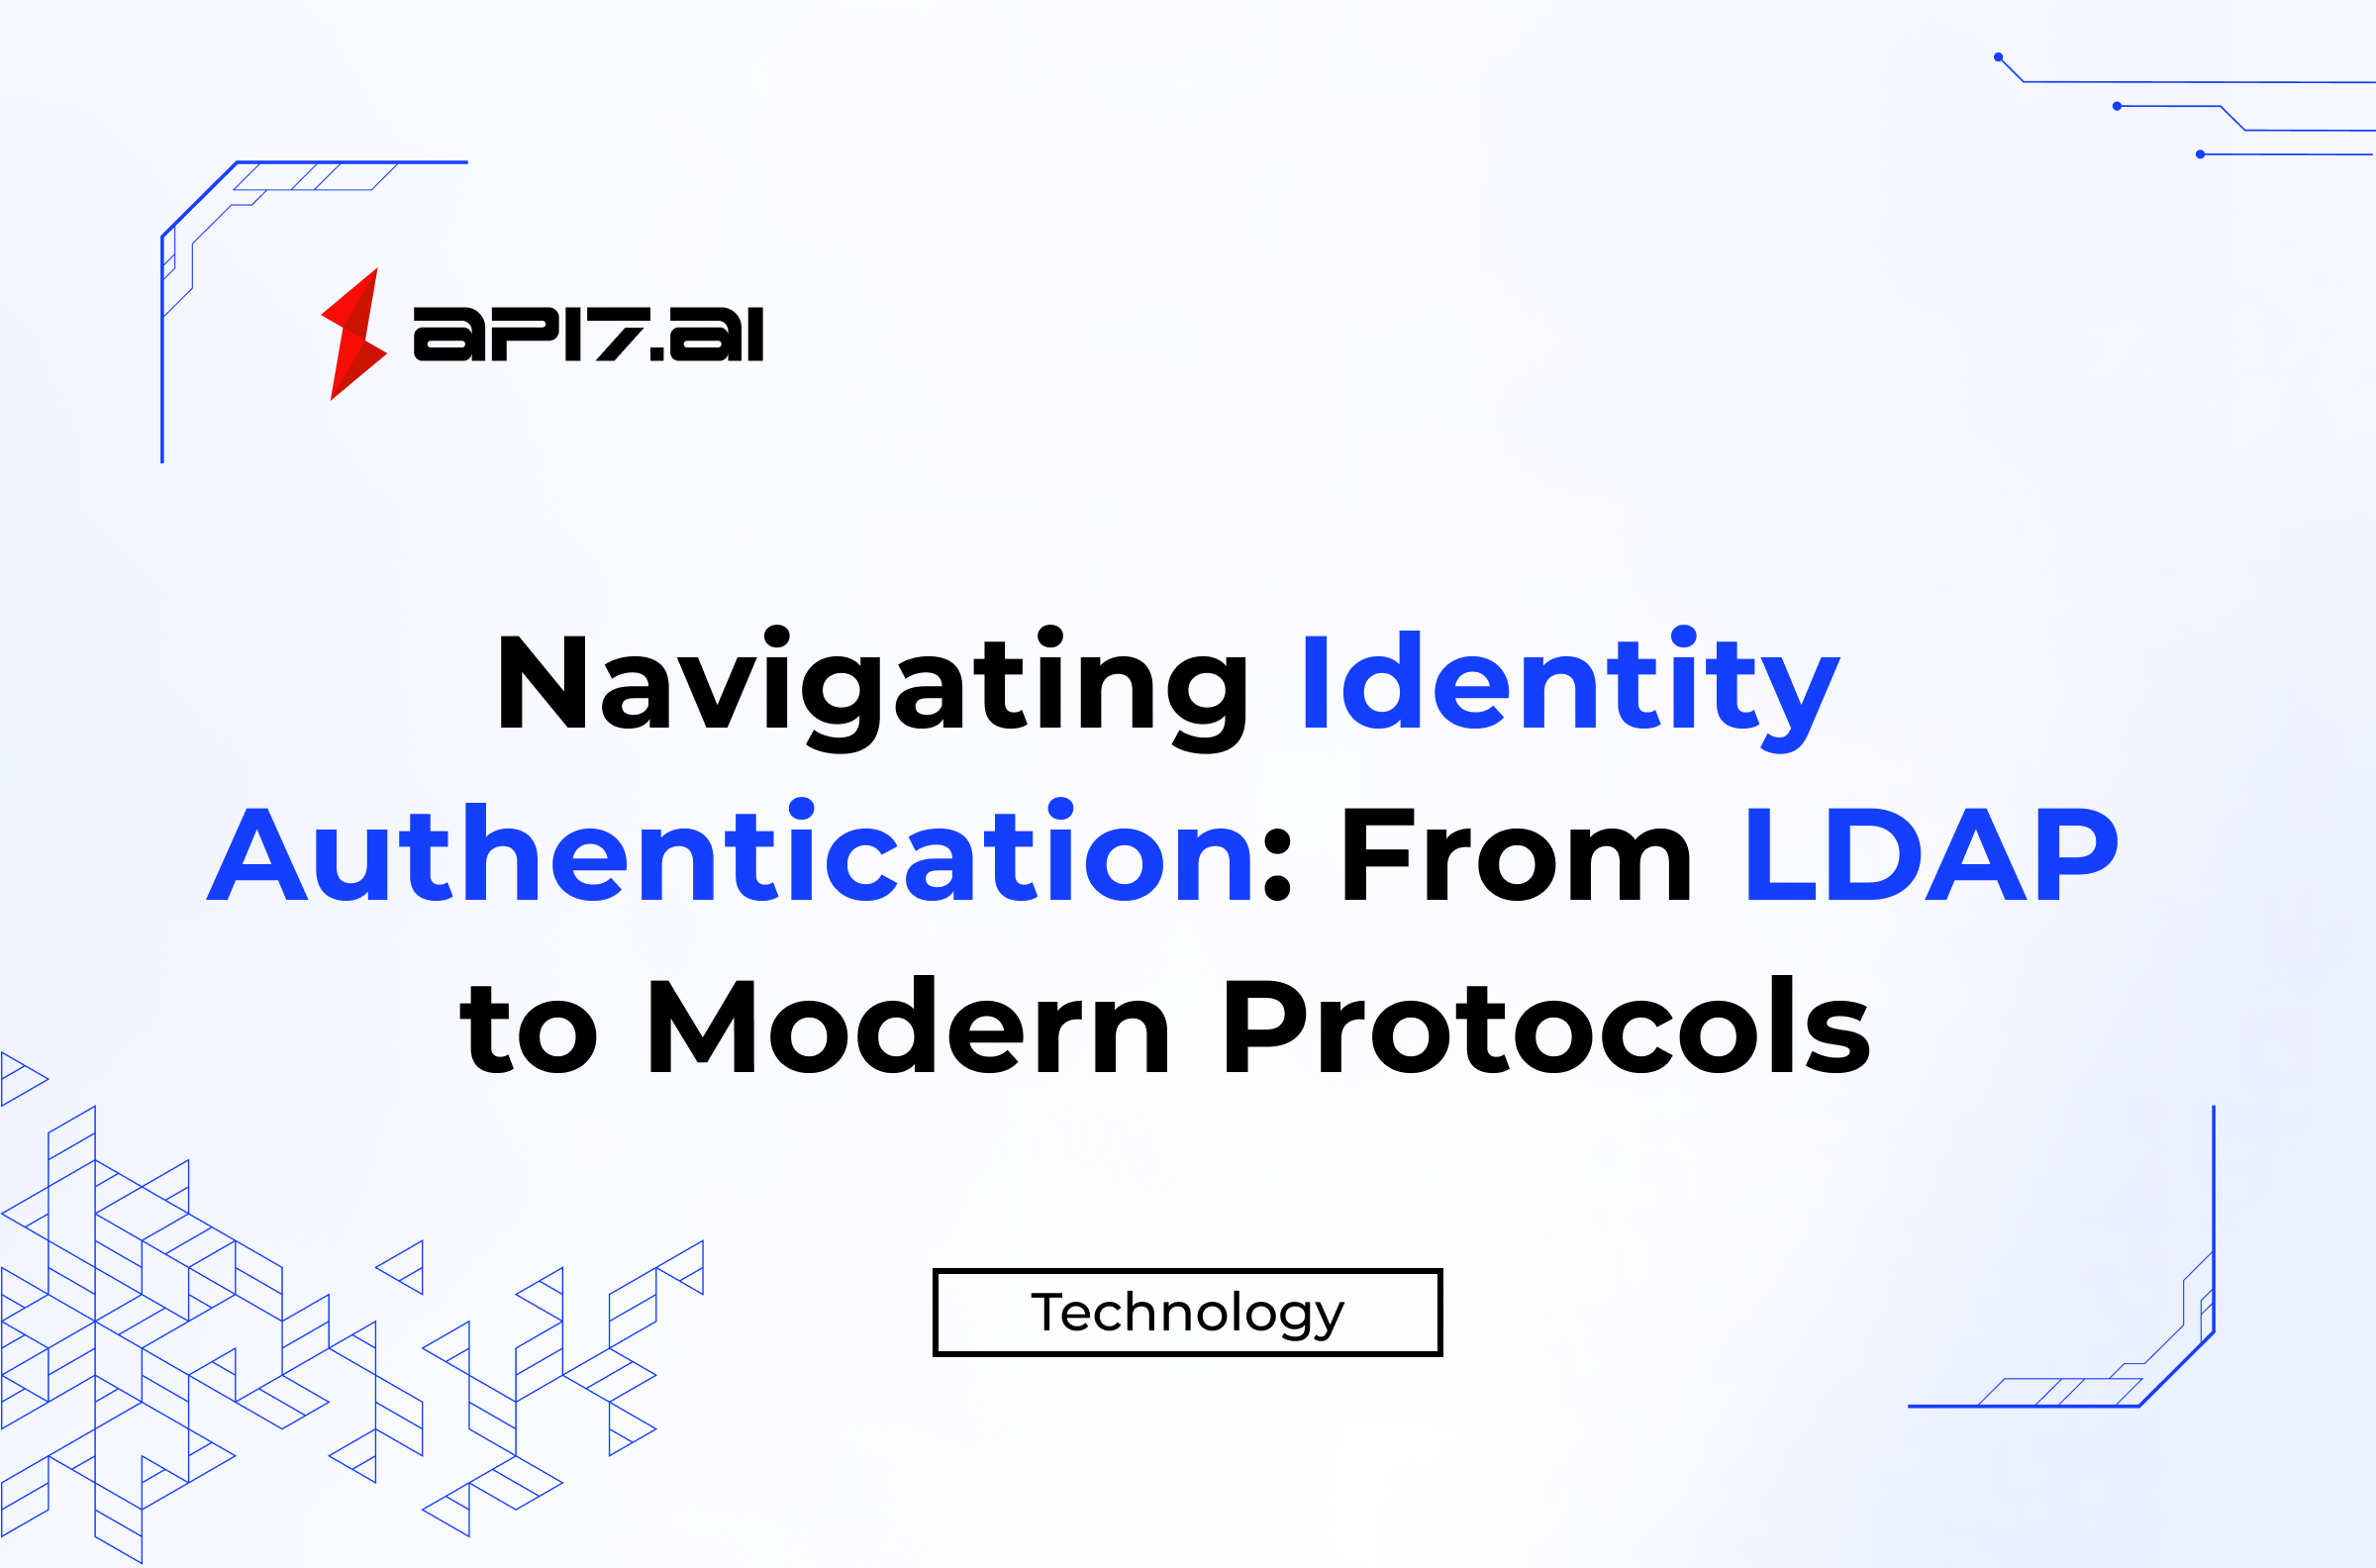 Navigating Identity Authentication: From LDAP to Modern Protocols